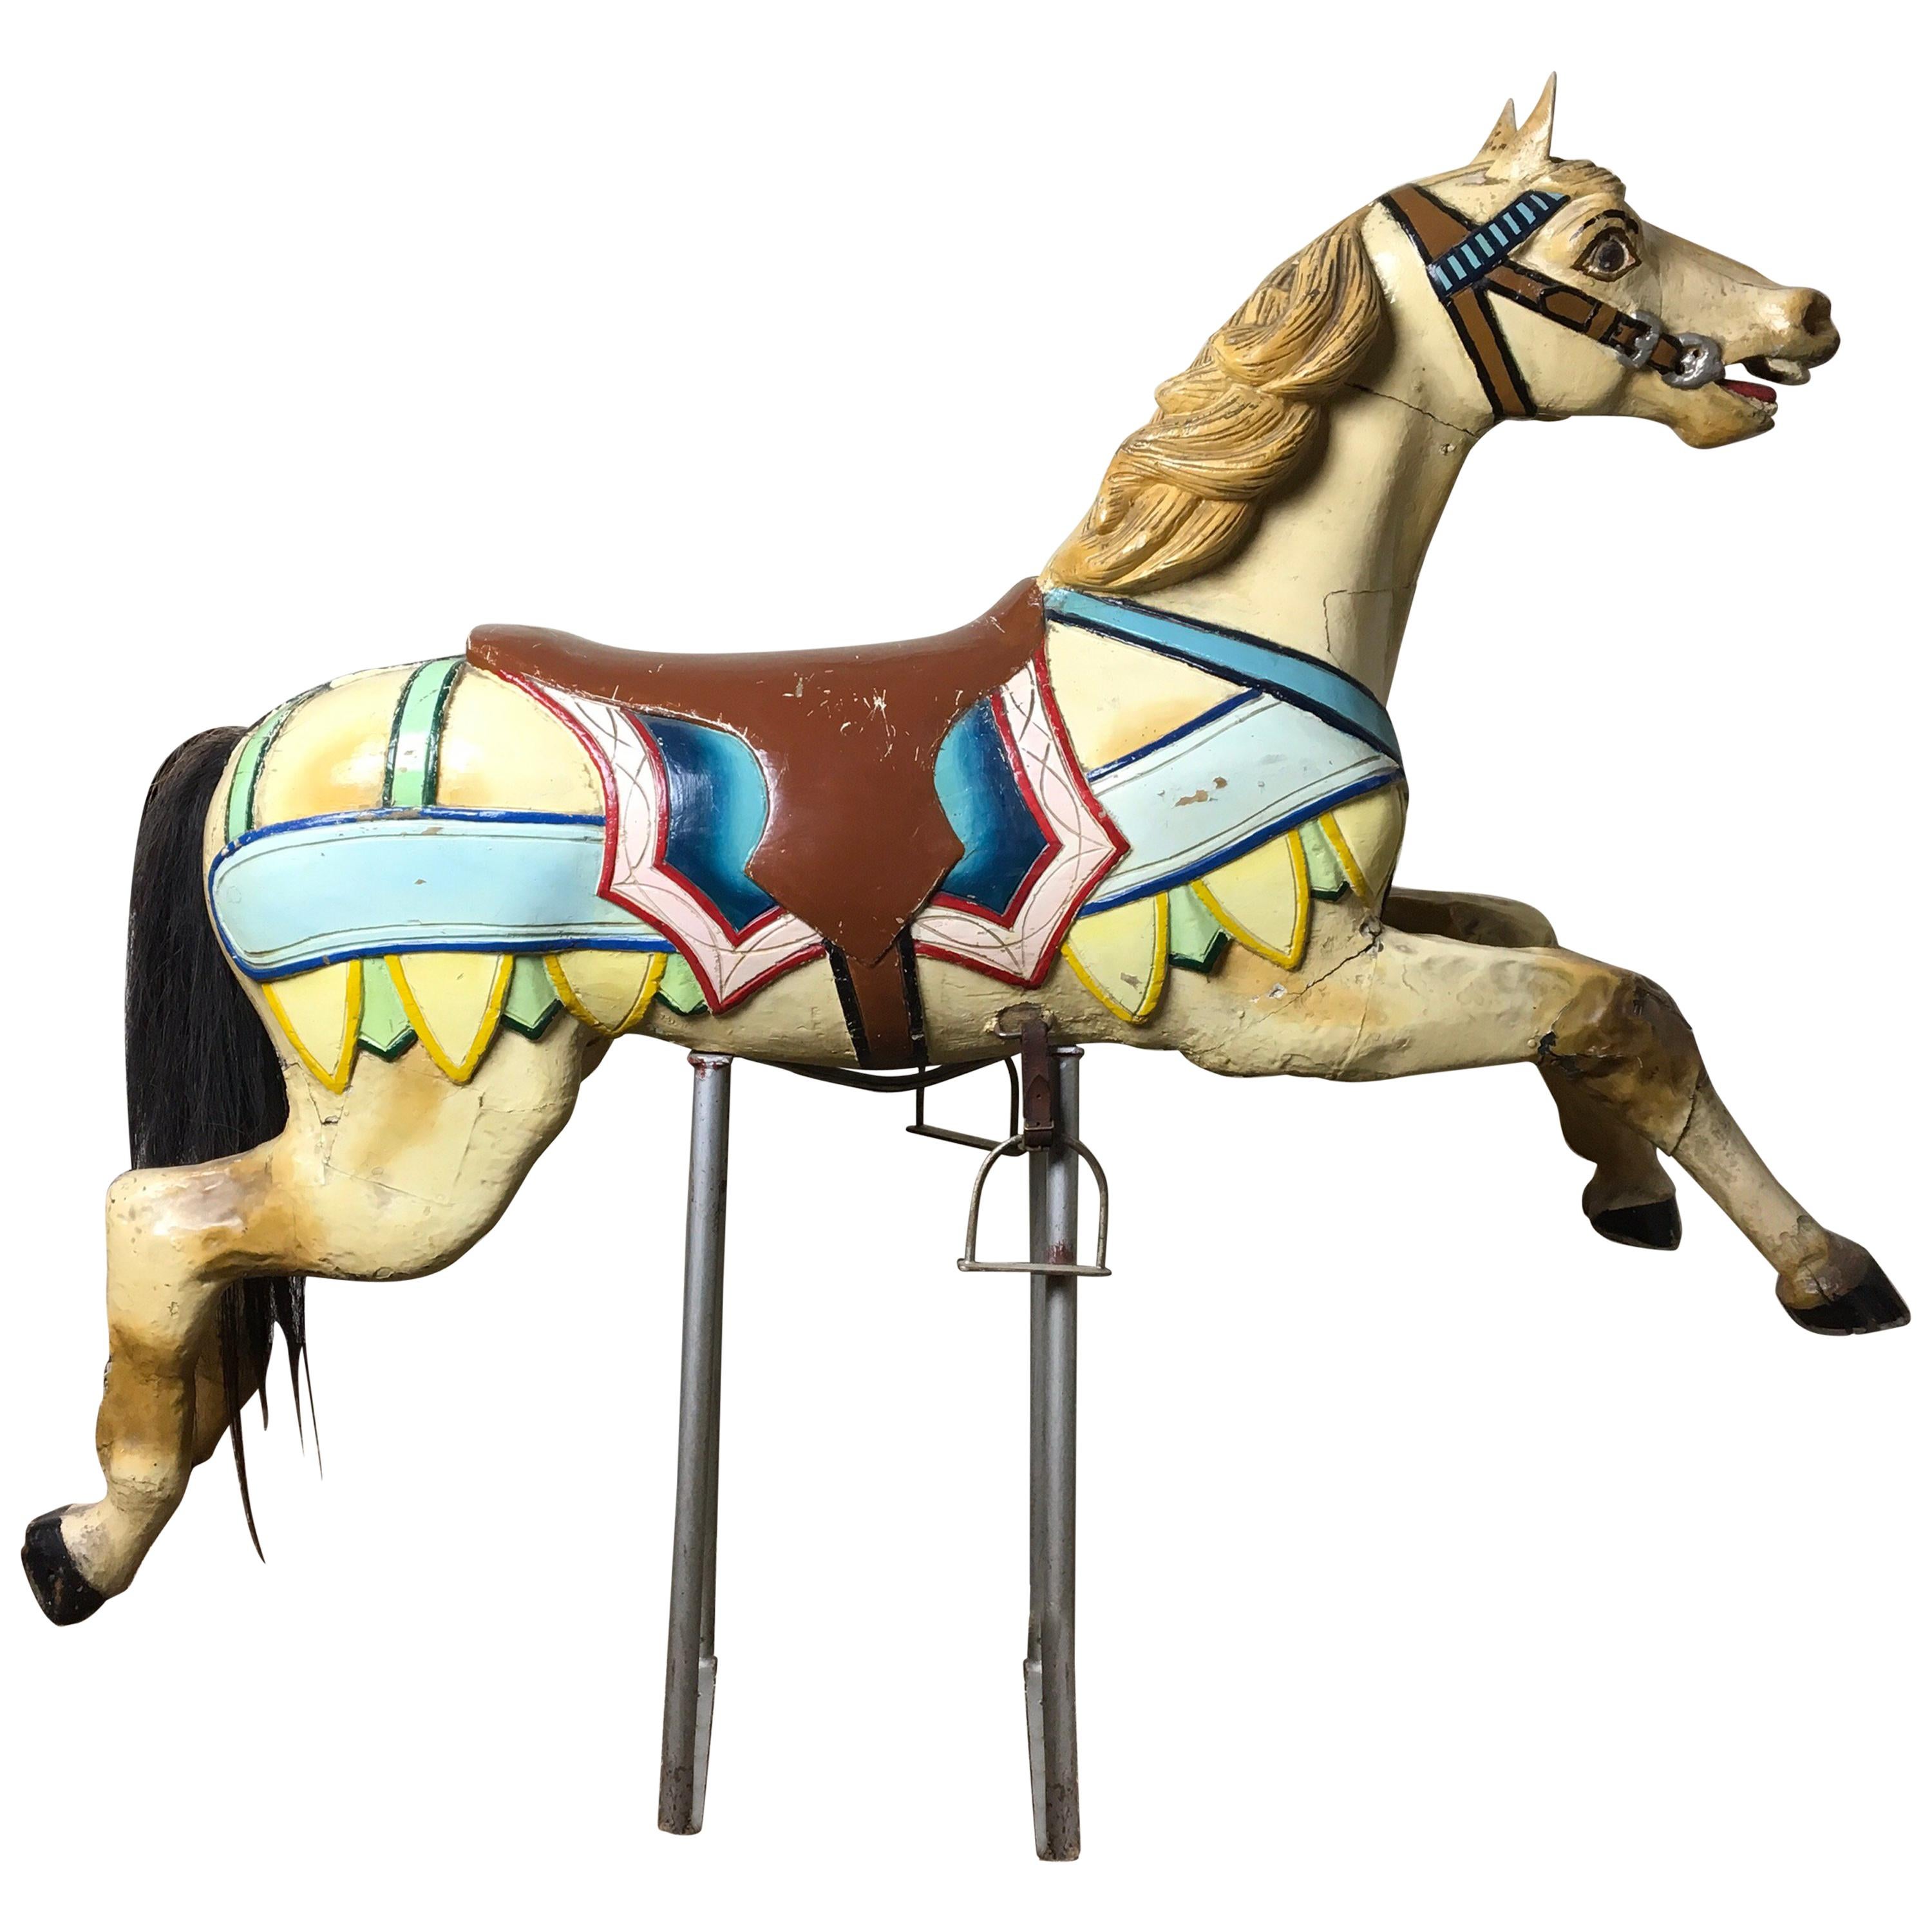 J. Hübner Carved Wood Carousel Horse,  Early 20th Century, Germany